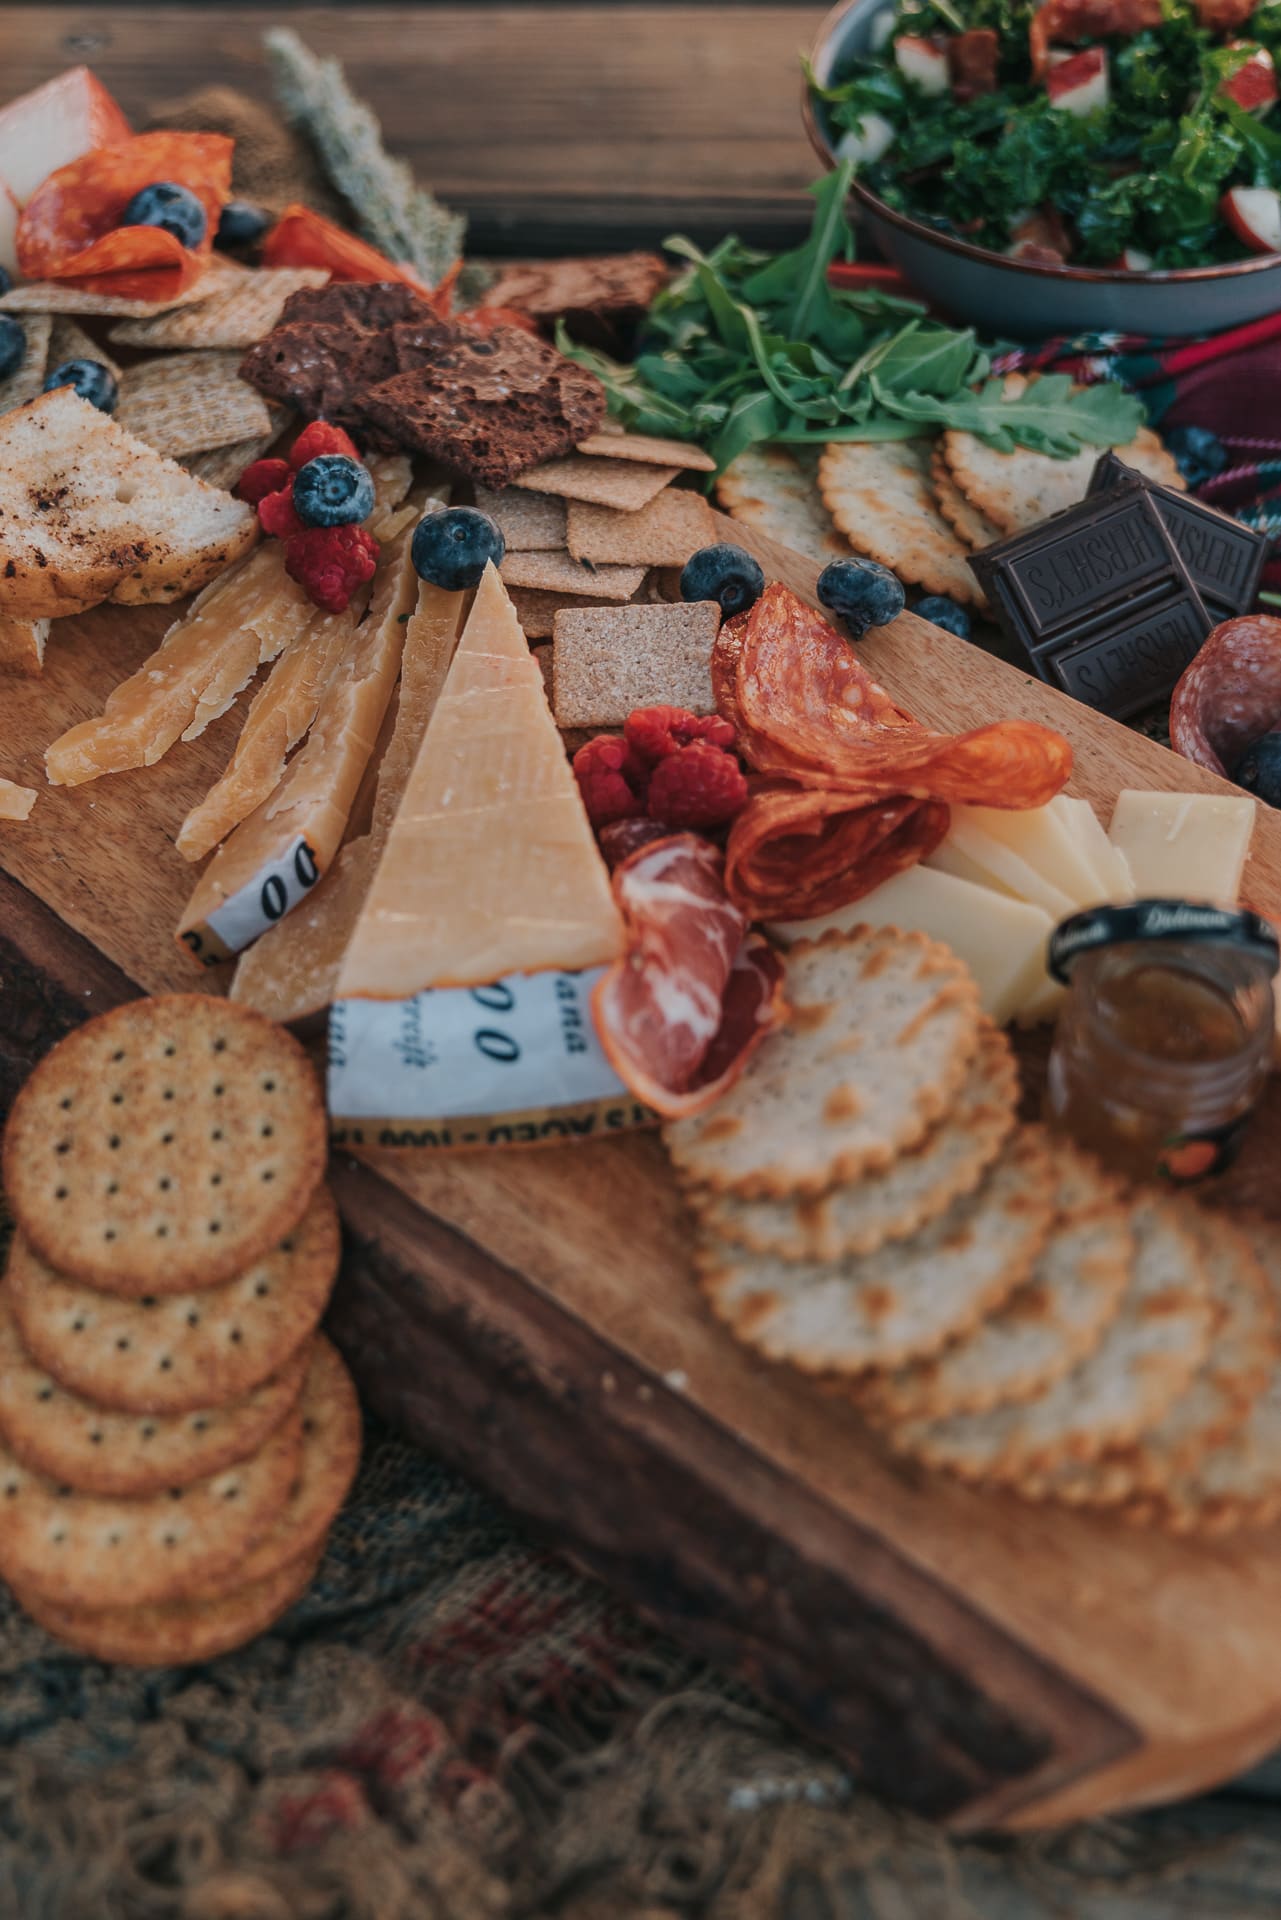 Wooden board with cured meats, crackers, and cheese.